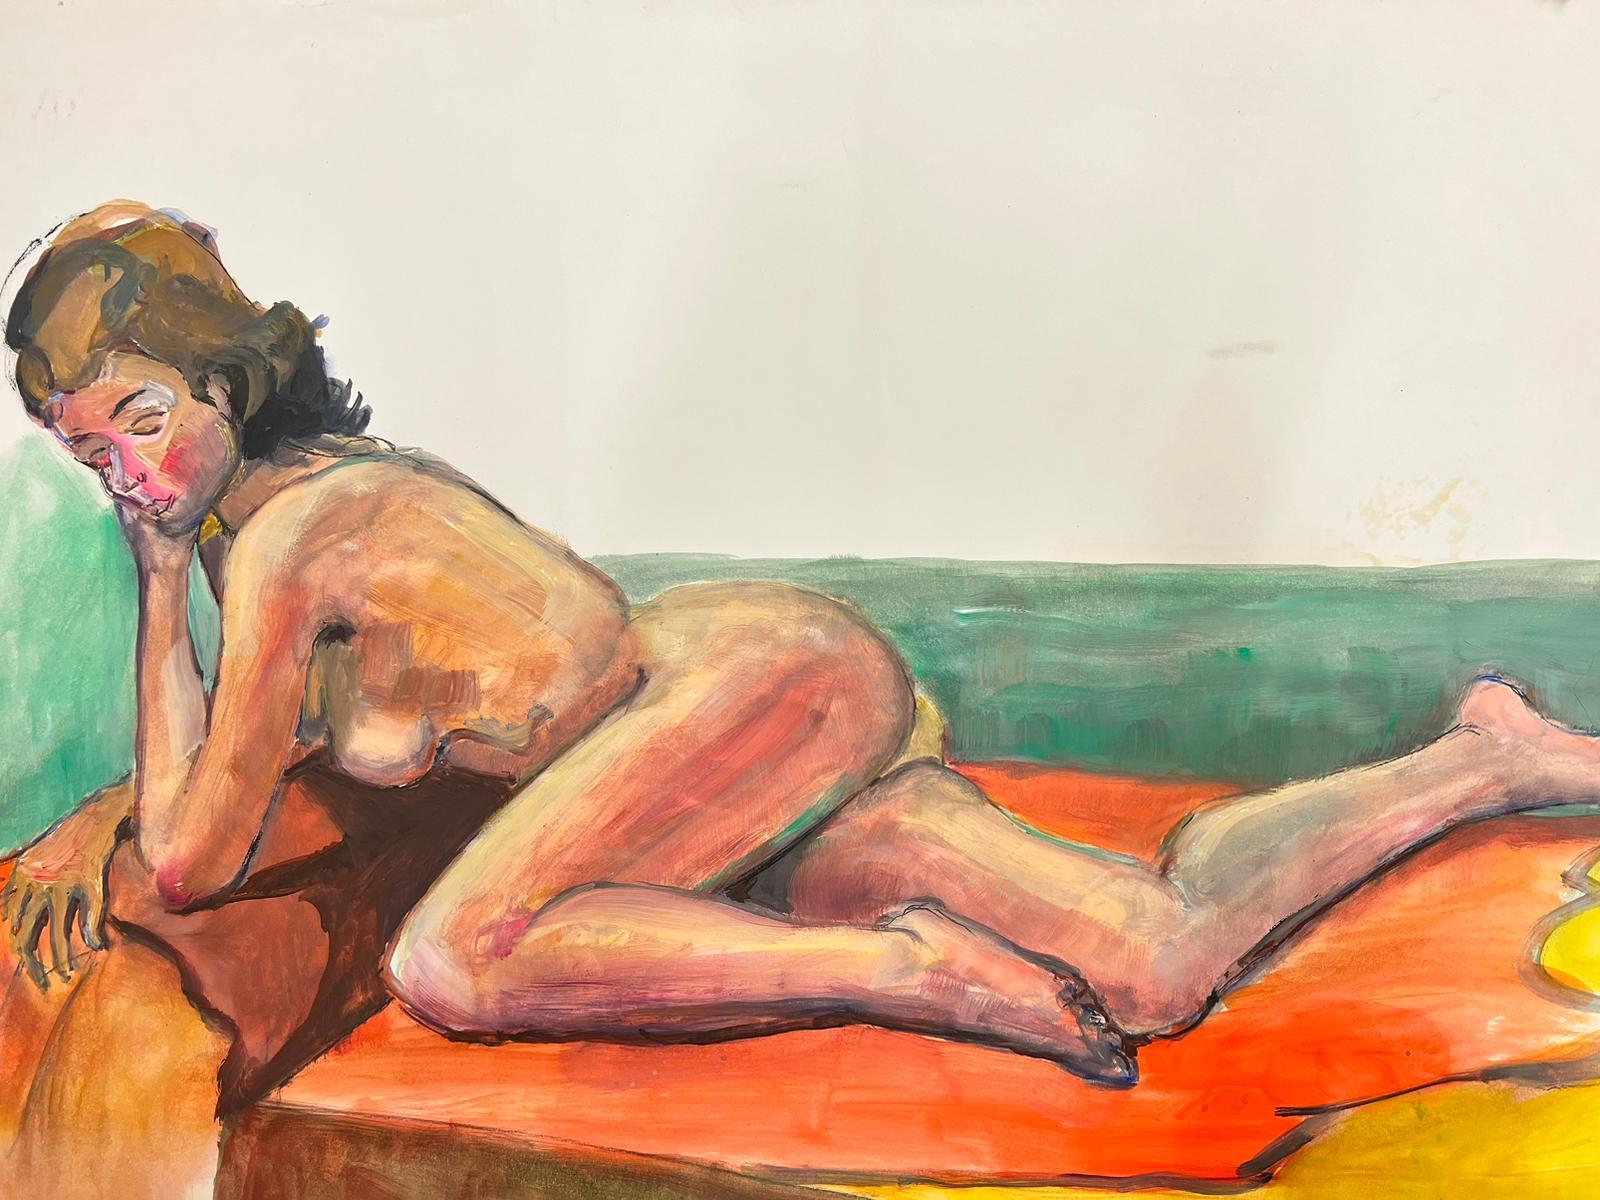 The Artists Model
Portrait of a Nude Lady reclining
French School, circa 1970's
oil painting on card, unframed
size: 18 x 26 inches
condition: overall very good, a very few light markings to the surface but nothing detrimental to the appeal and